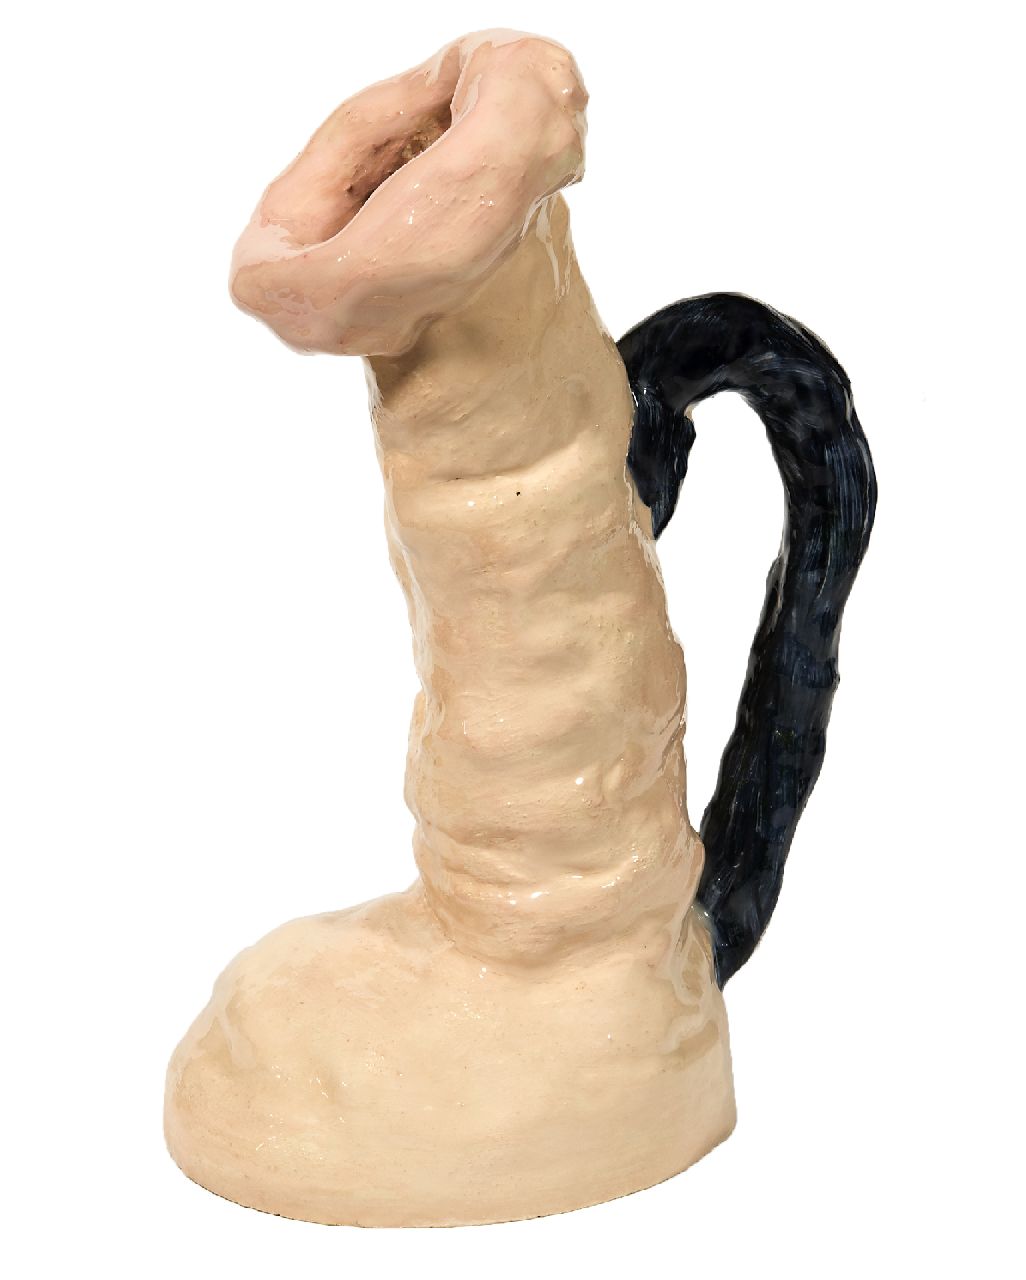 Toorn J.P. van den | Jacobus Petrus 'Joost' van den Toorn | Sculptures and objects offered for sale | Sculpture in the shape of a jug, earthenware 30.0 x 17.0 cm, signed on the side of the base and dated 2009